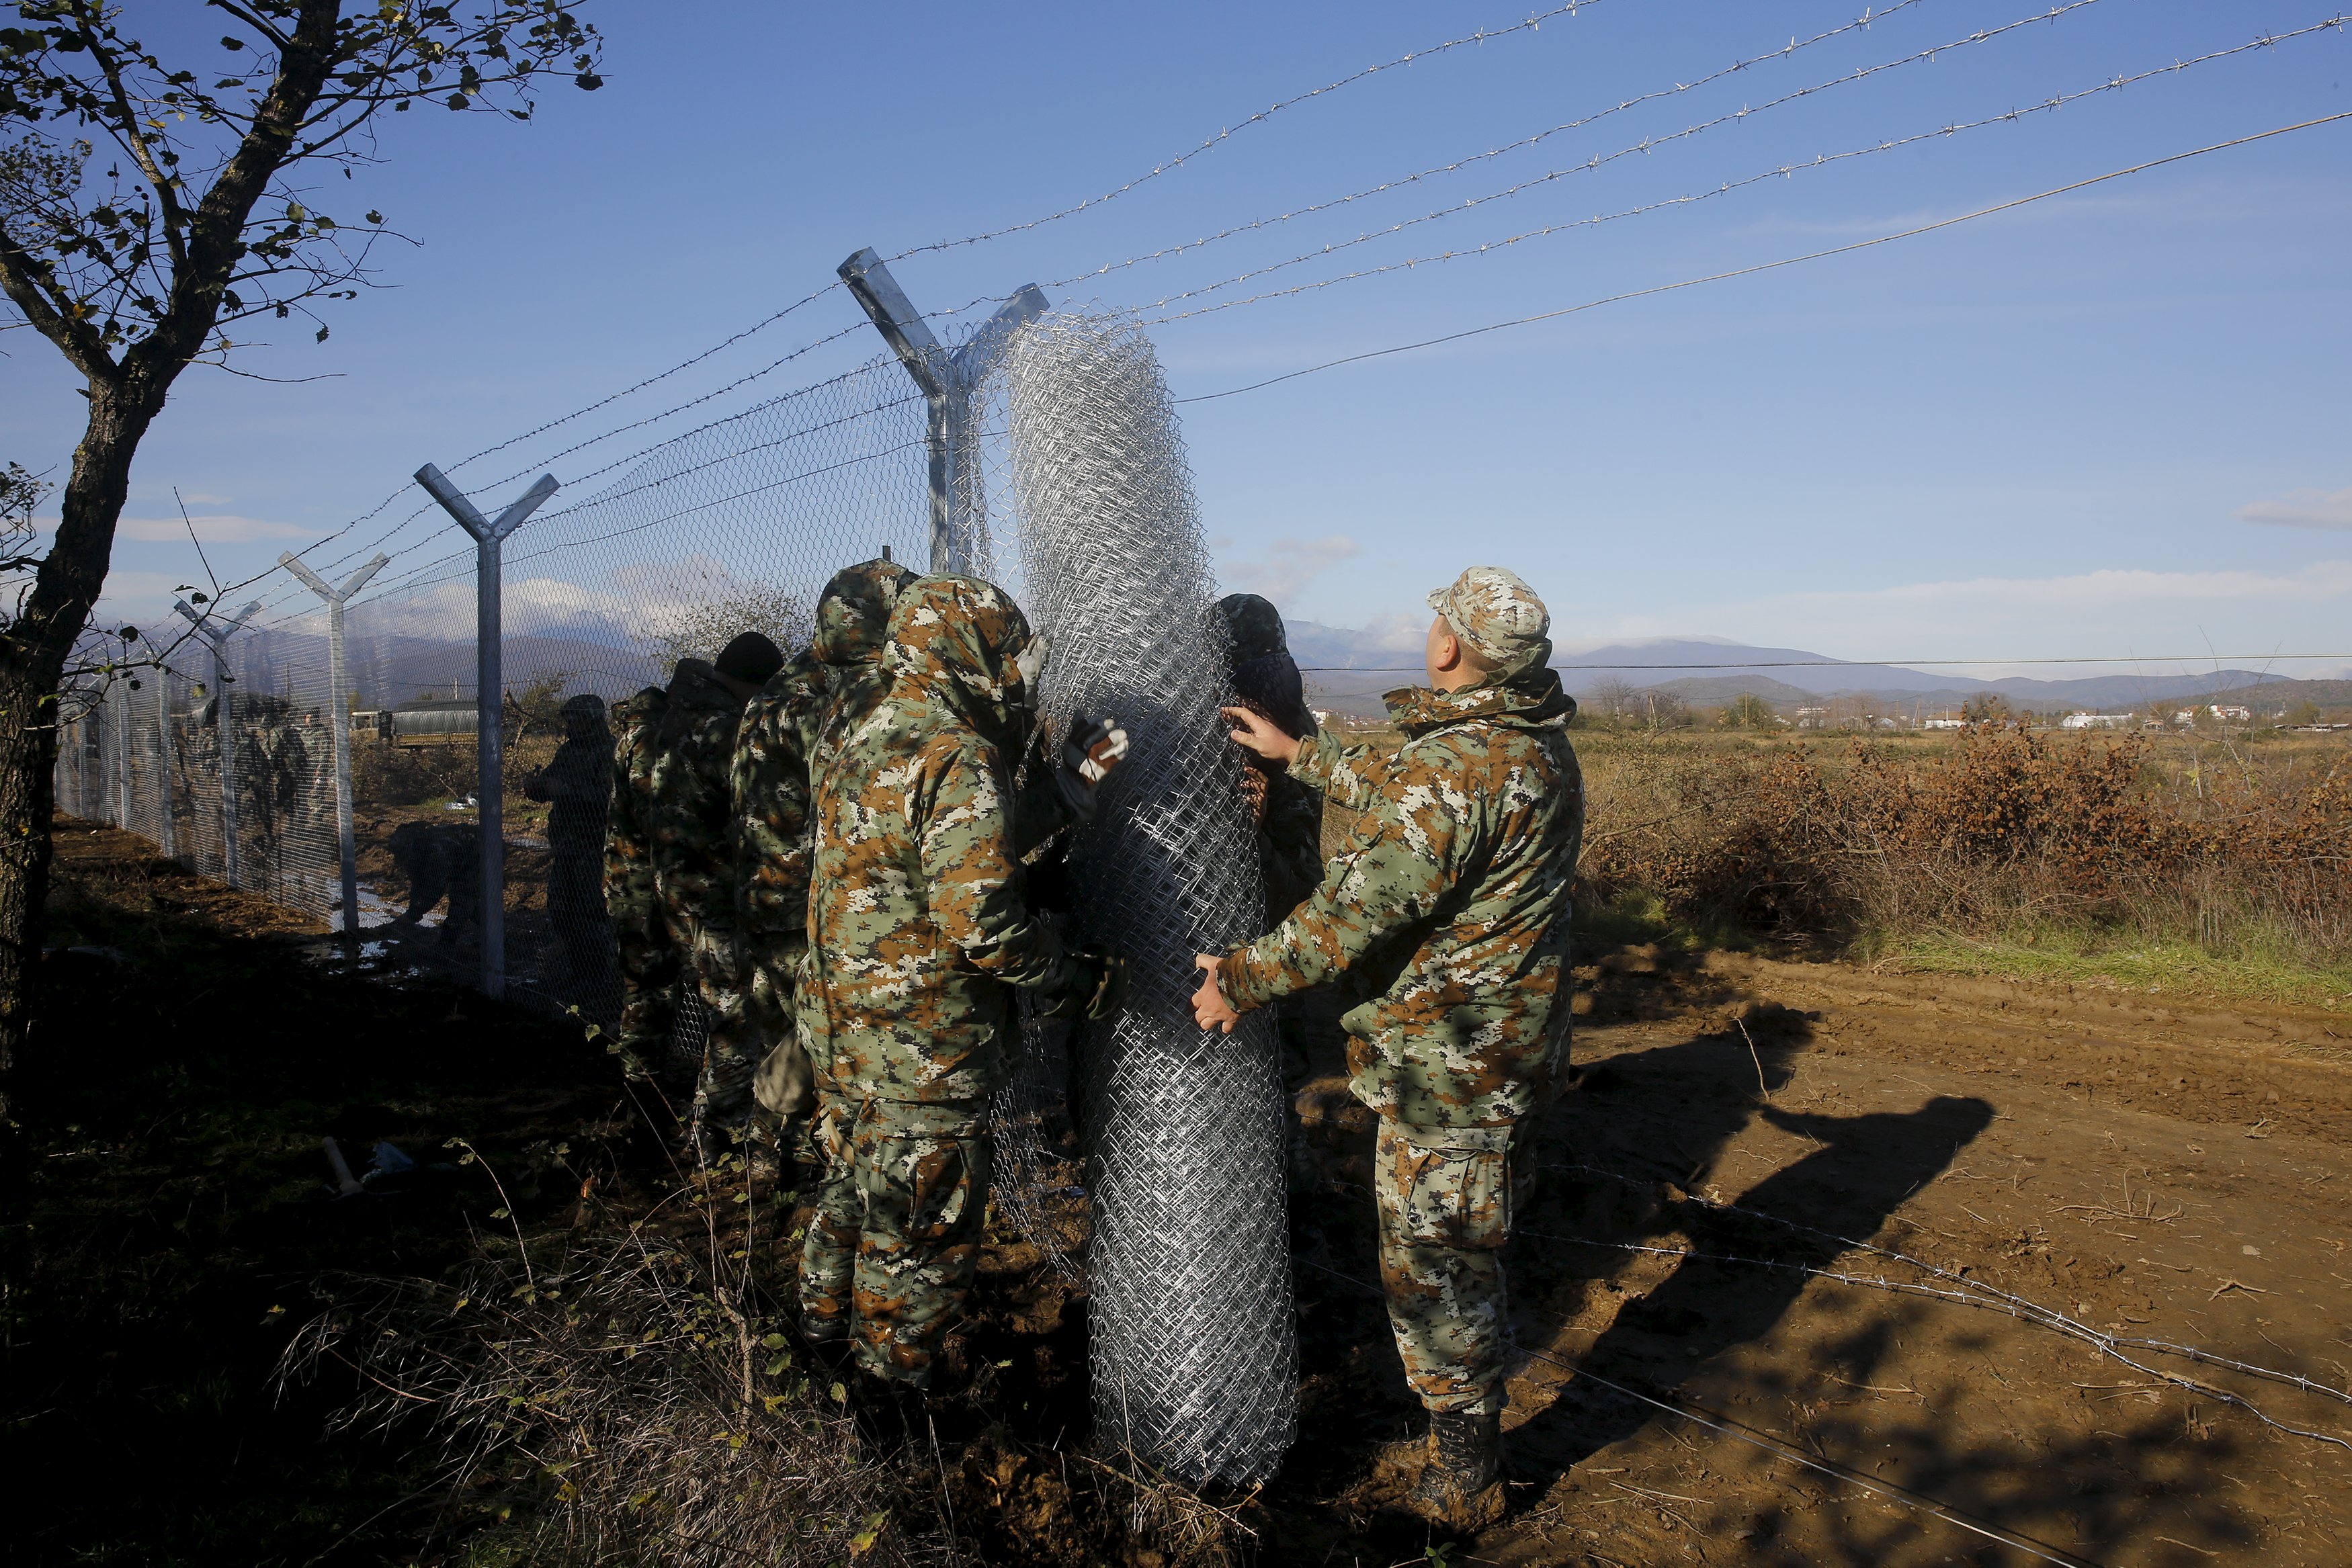 Macedonian soldiers build up a metal fence at the Greek-Macedonian border near the Greek village of Idomeni, November 28, 2015. Soldiers in Macedonia began erecting a metal fence on Saturday on the country's southern border with Greece, described by an official as a "preventive" measure to better control the flow of migrants across the Balkans. Picture taken from the Greek side of the border. REUTERS/Yannis Behrakis